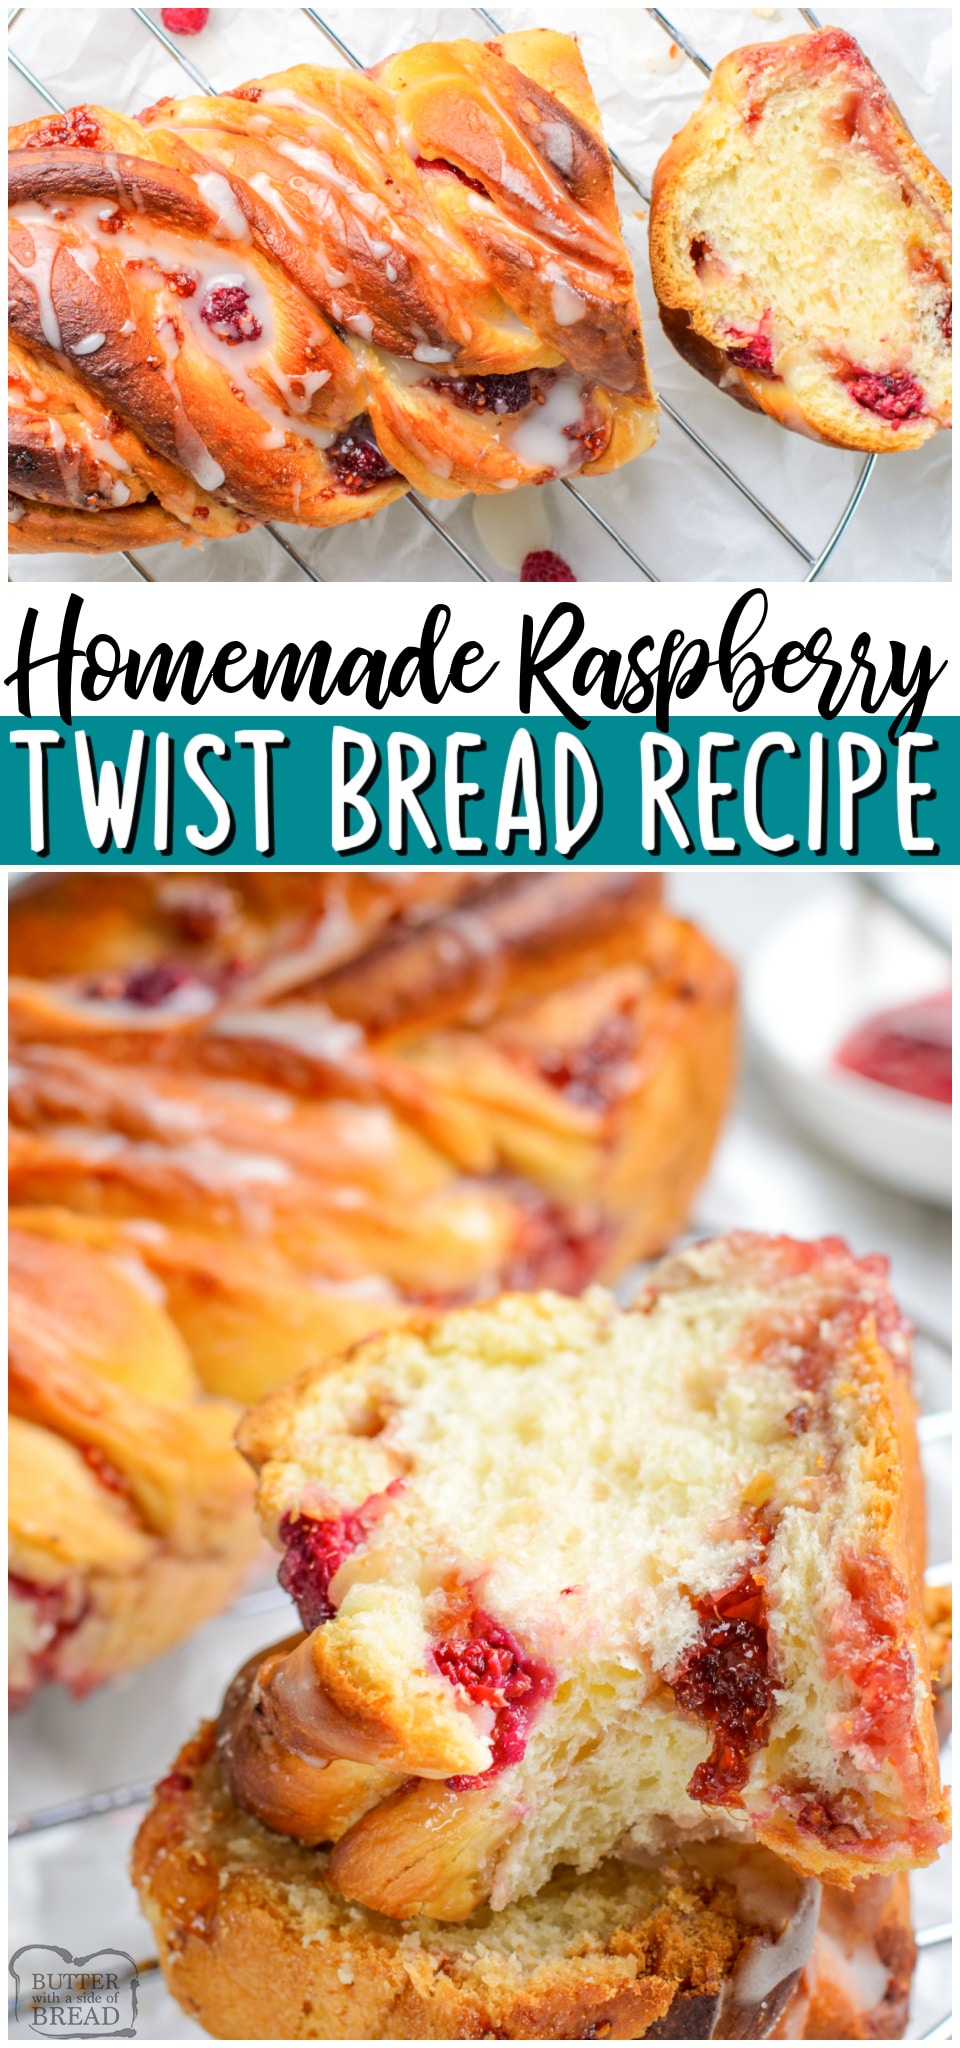 Raspberry Twist Bread is a delicious loaf of homemade sweet bread swirled with raspberry jam. Served with lemon icing and brioche-style dough this bread is perfect for breakfast or dessert! #bread #raspberry #twist #baking #breadrecipe #sweetbread from BUTTER WITH A SIDE OF BREAD